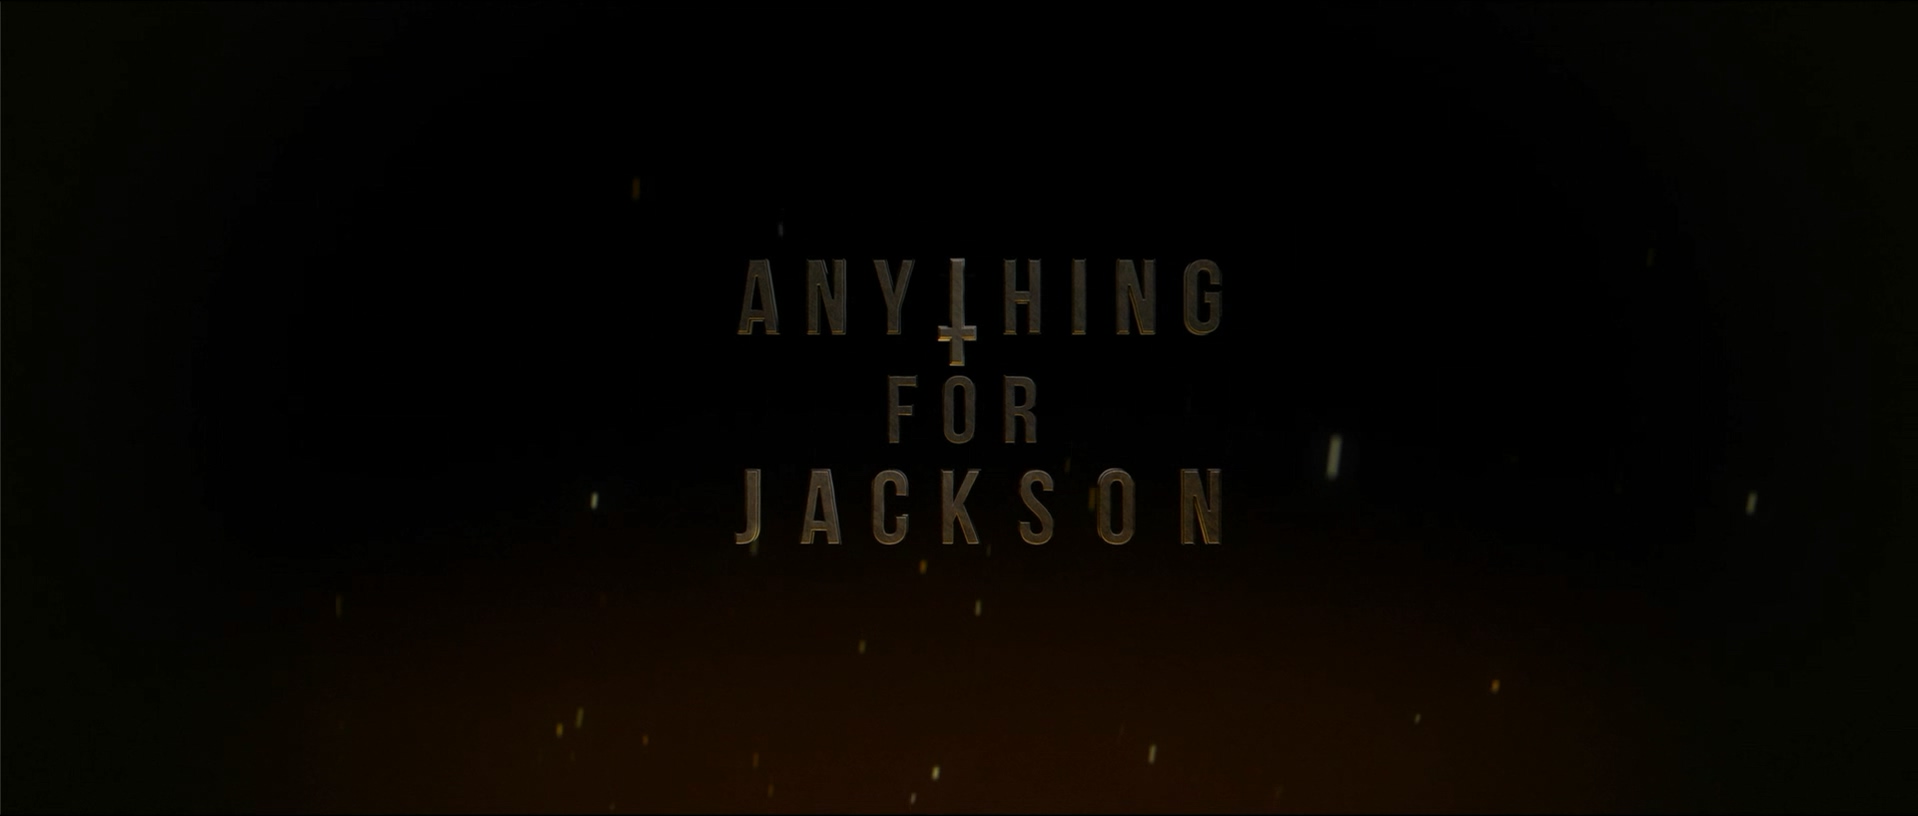 Movie Review: 'Anything for Jackson' – Blood in the Snow Film Festival 2020  - The GCE